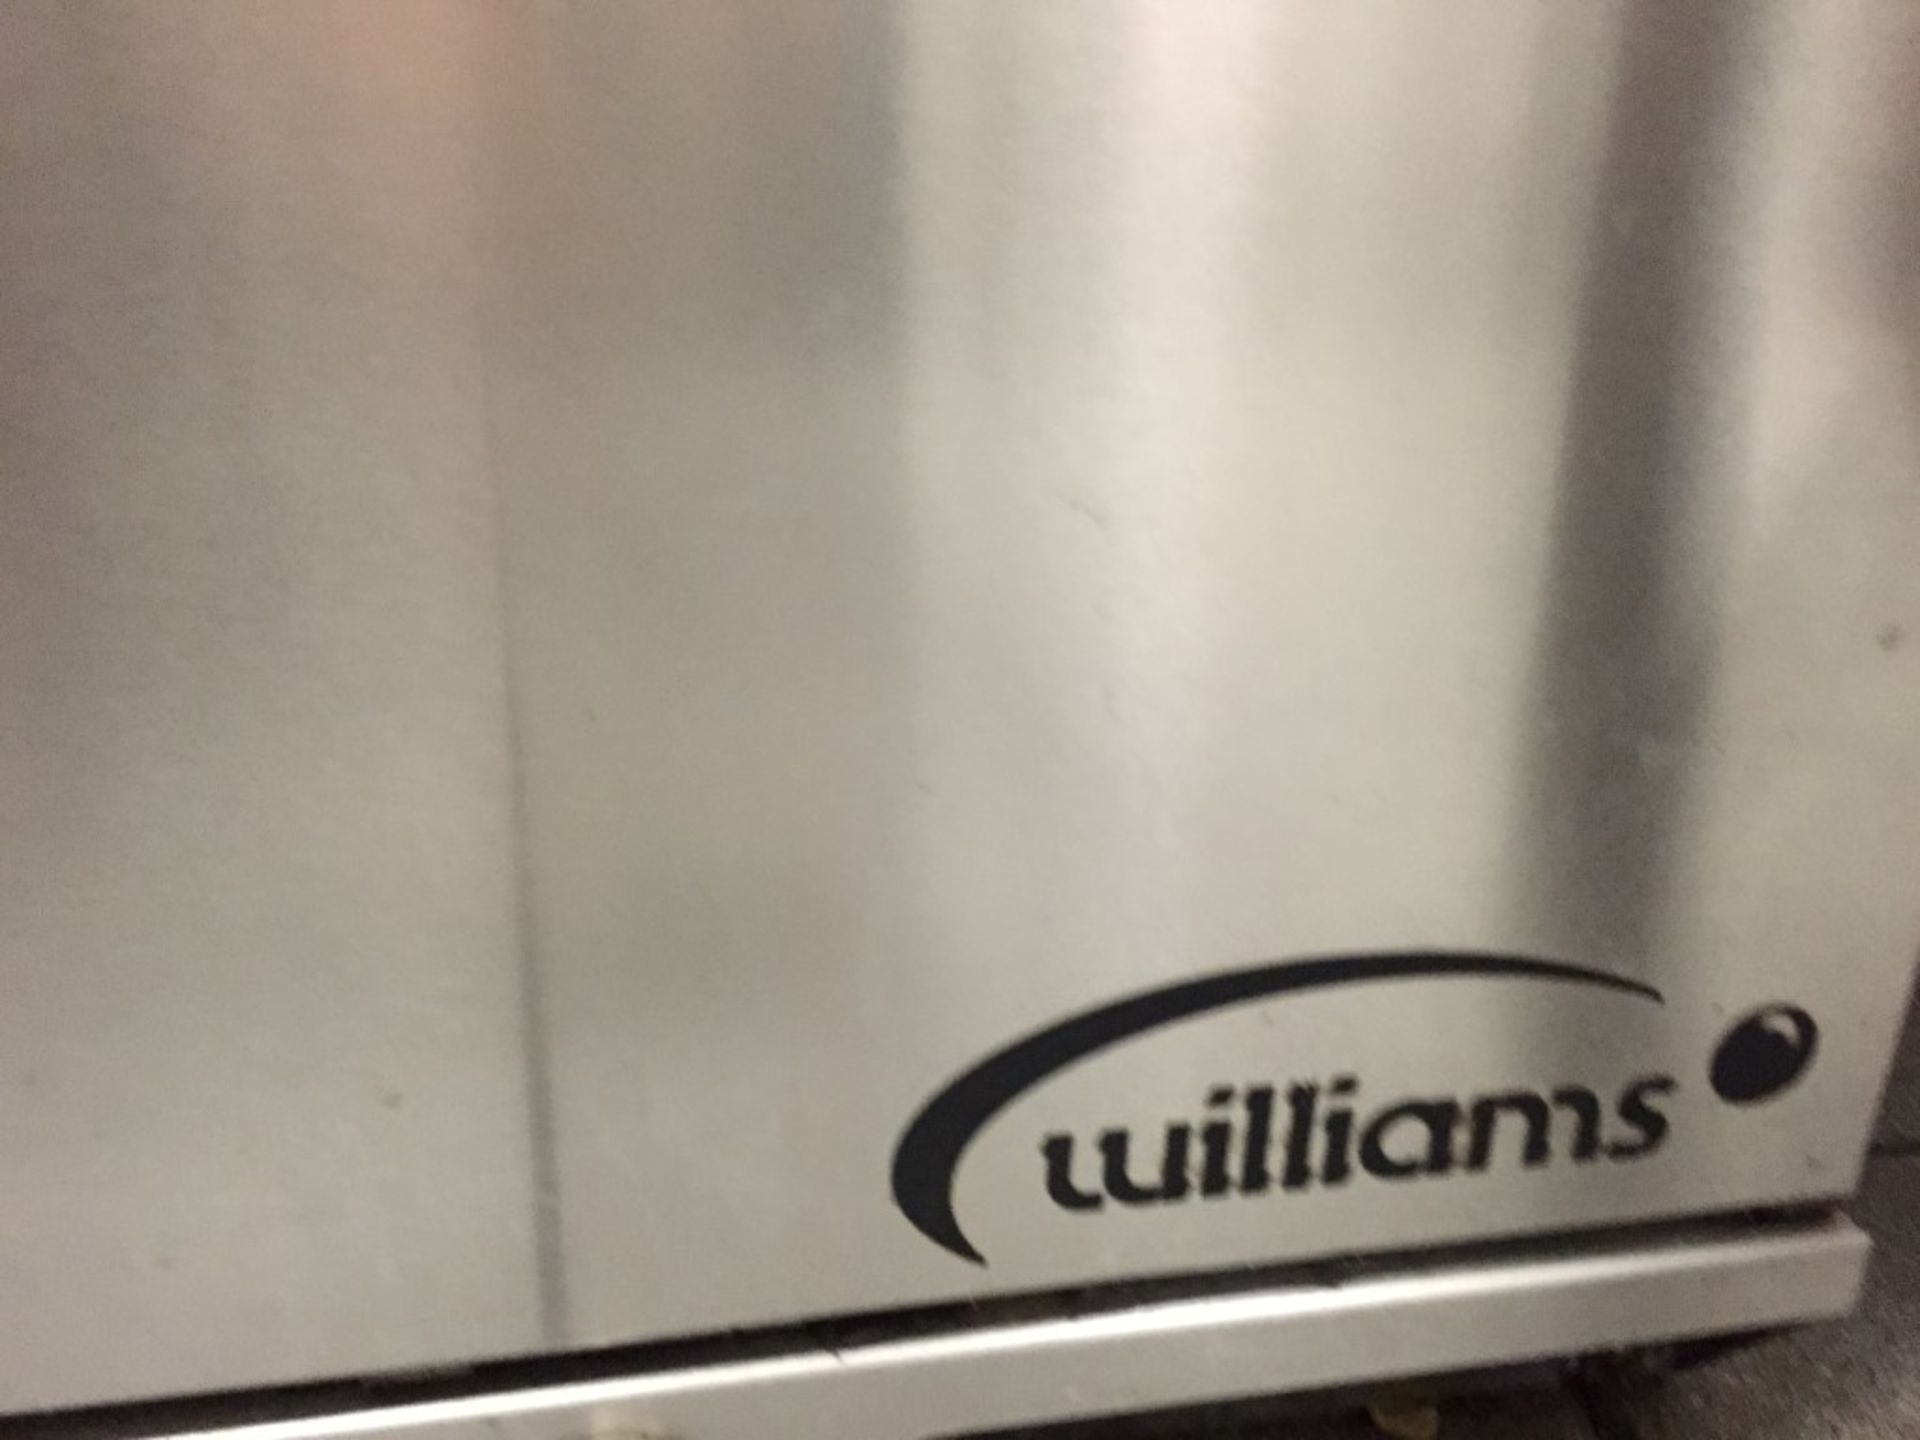 1 x Williams Two Door Commercial Stainless Steel Chiller - Model BC2 SS R1 - 240v -H89 x W89 x D51 - Image 3 of 5